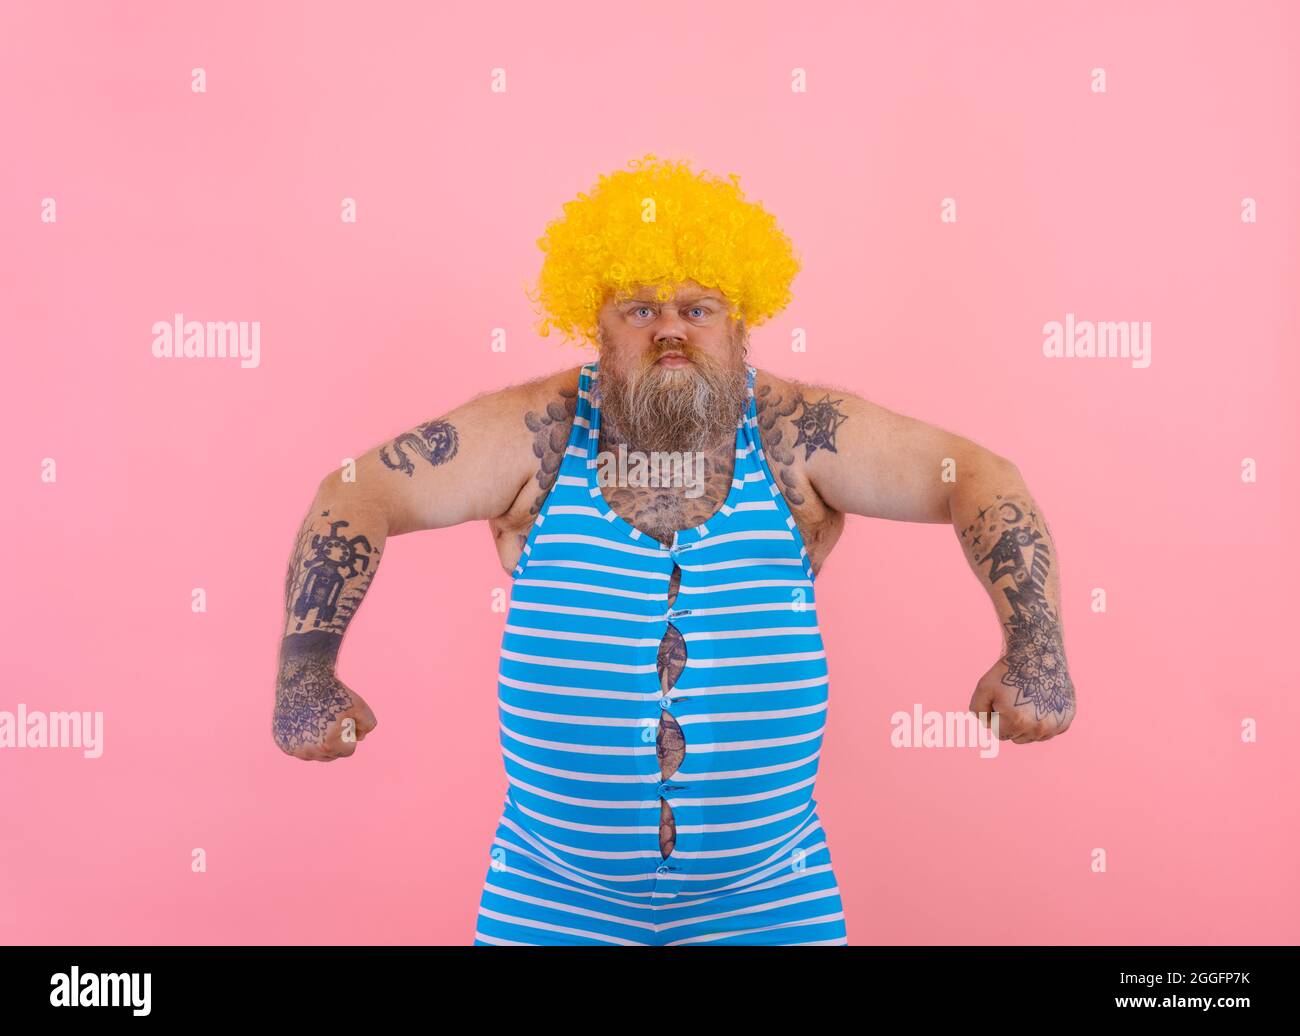 Angry man with yellow wig and swimsuit is ready to the summer Stock Photo